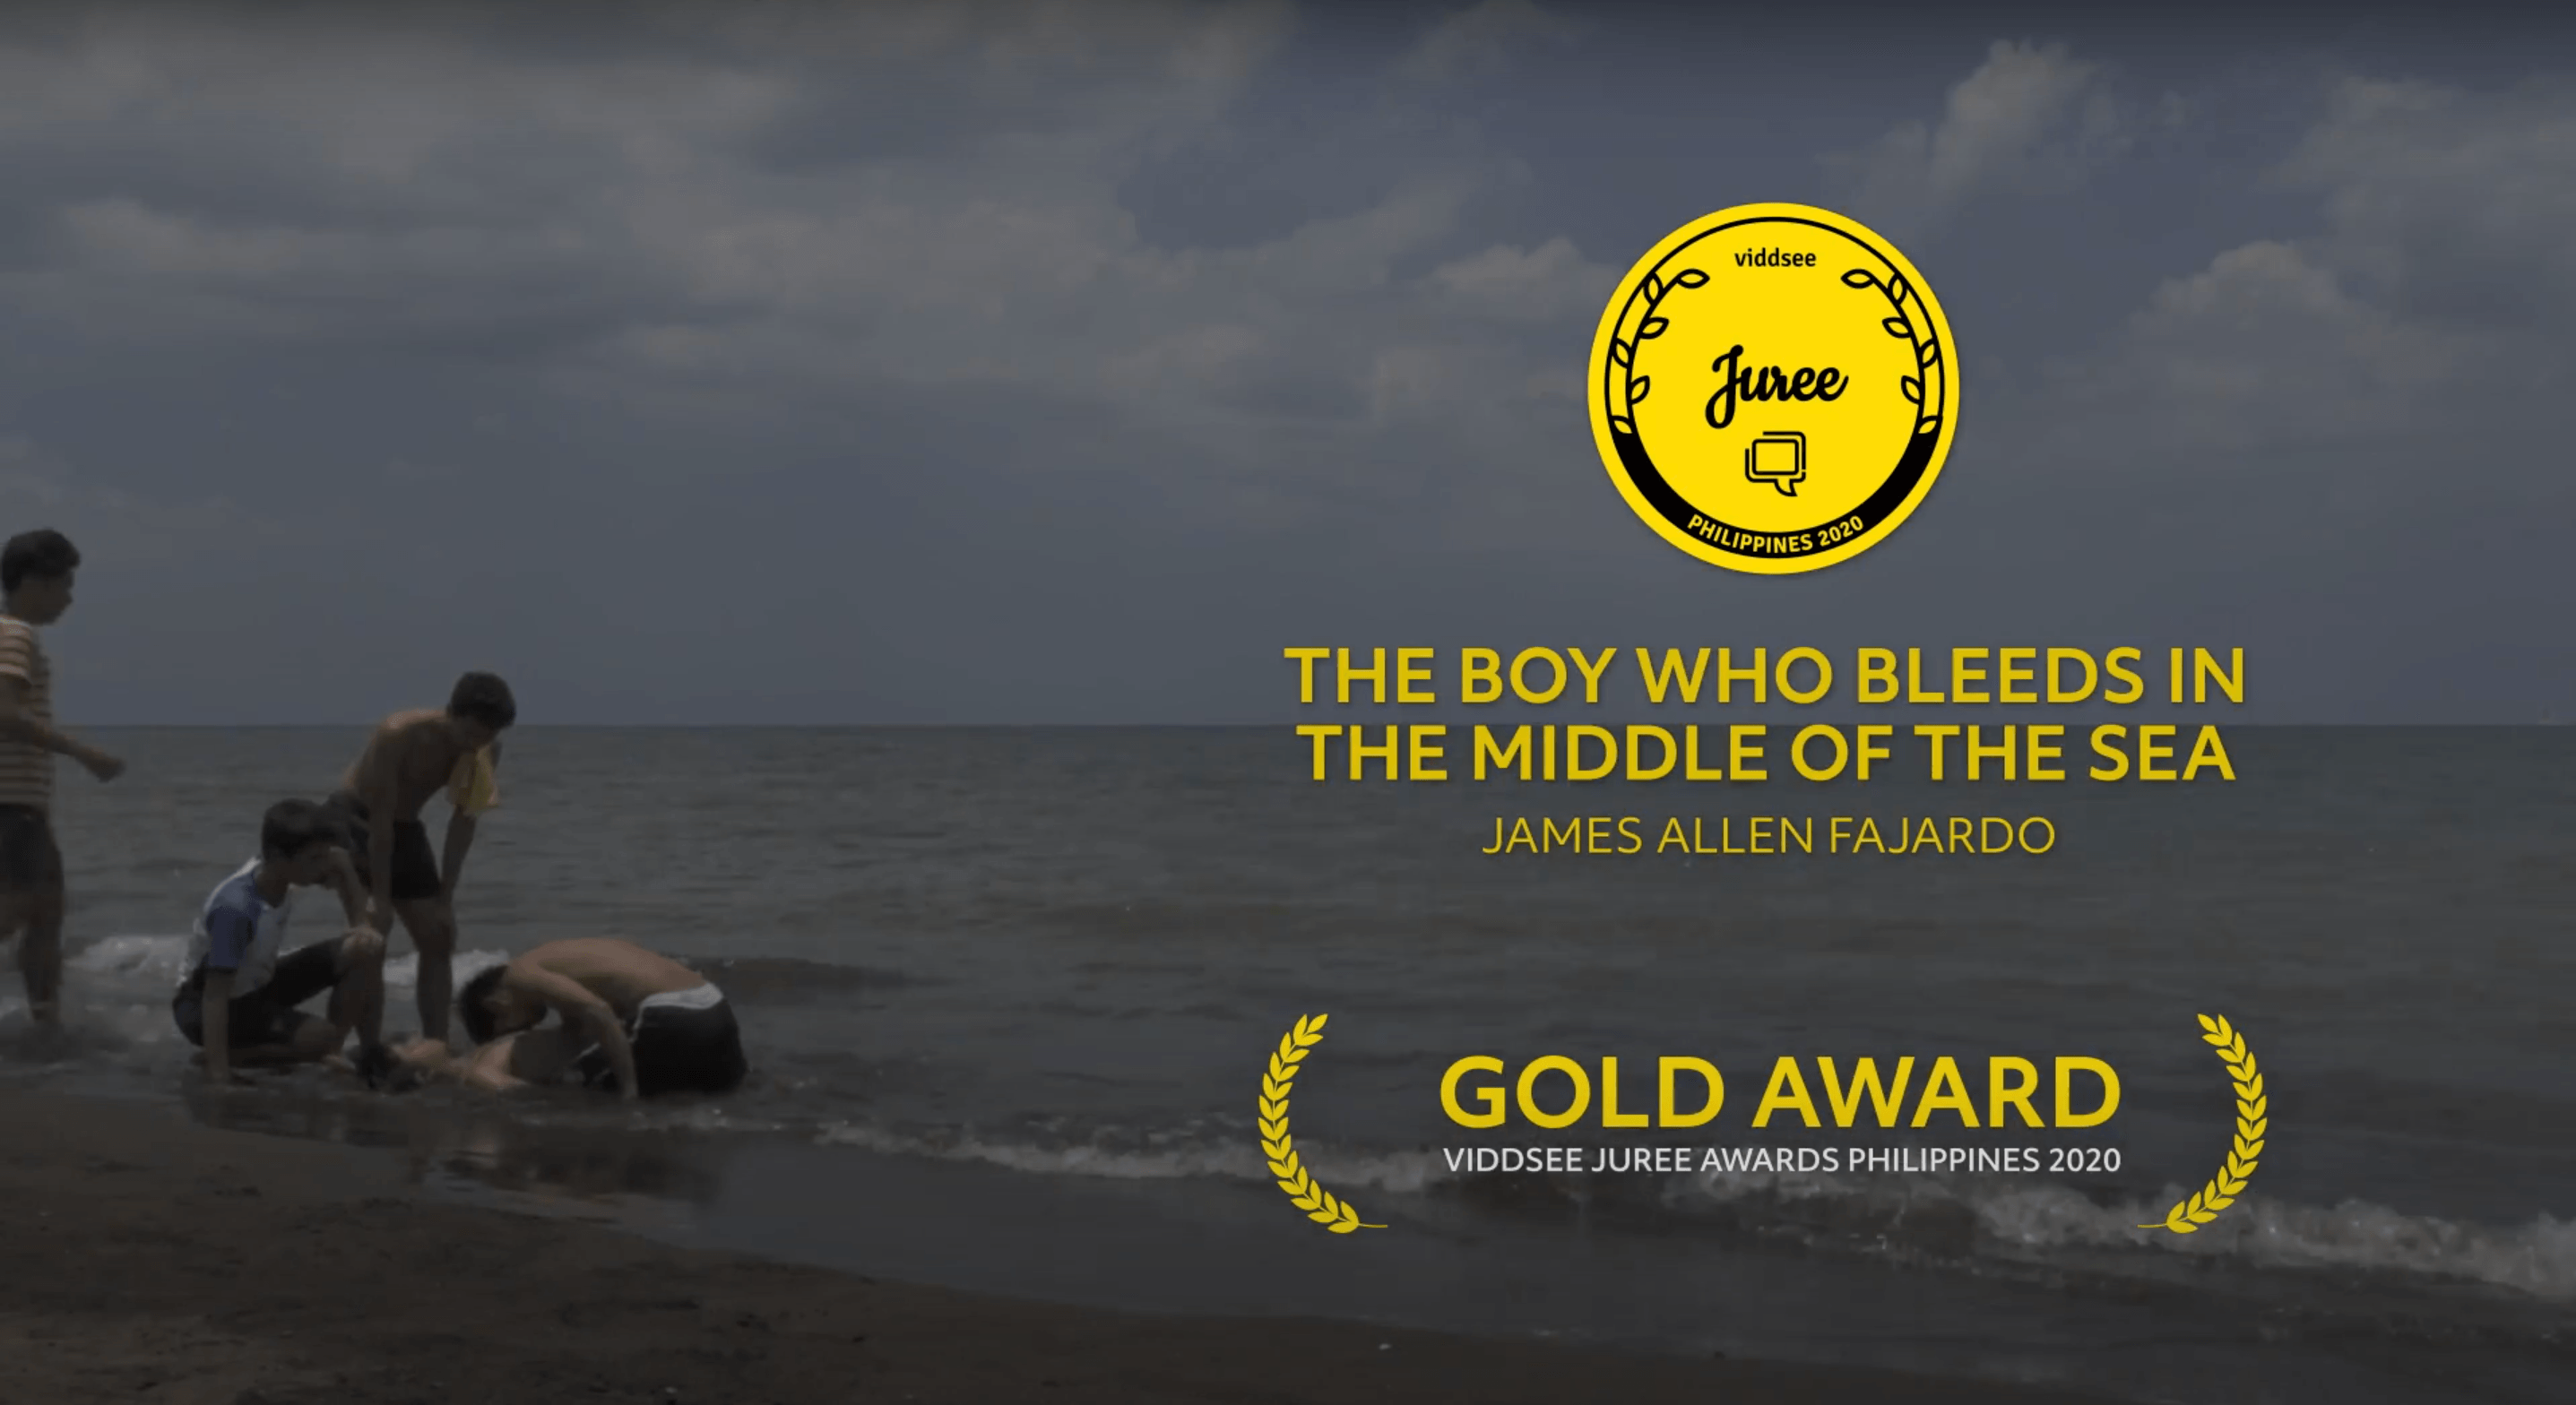 ‘The Boy Who Bleeds In The Middle Of The Sea’ tops Viddsee Juree Awards Philippines